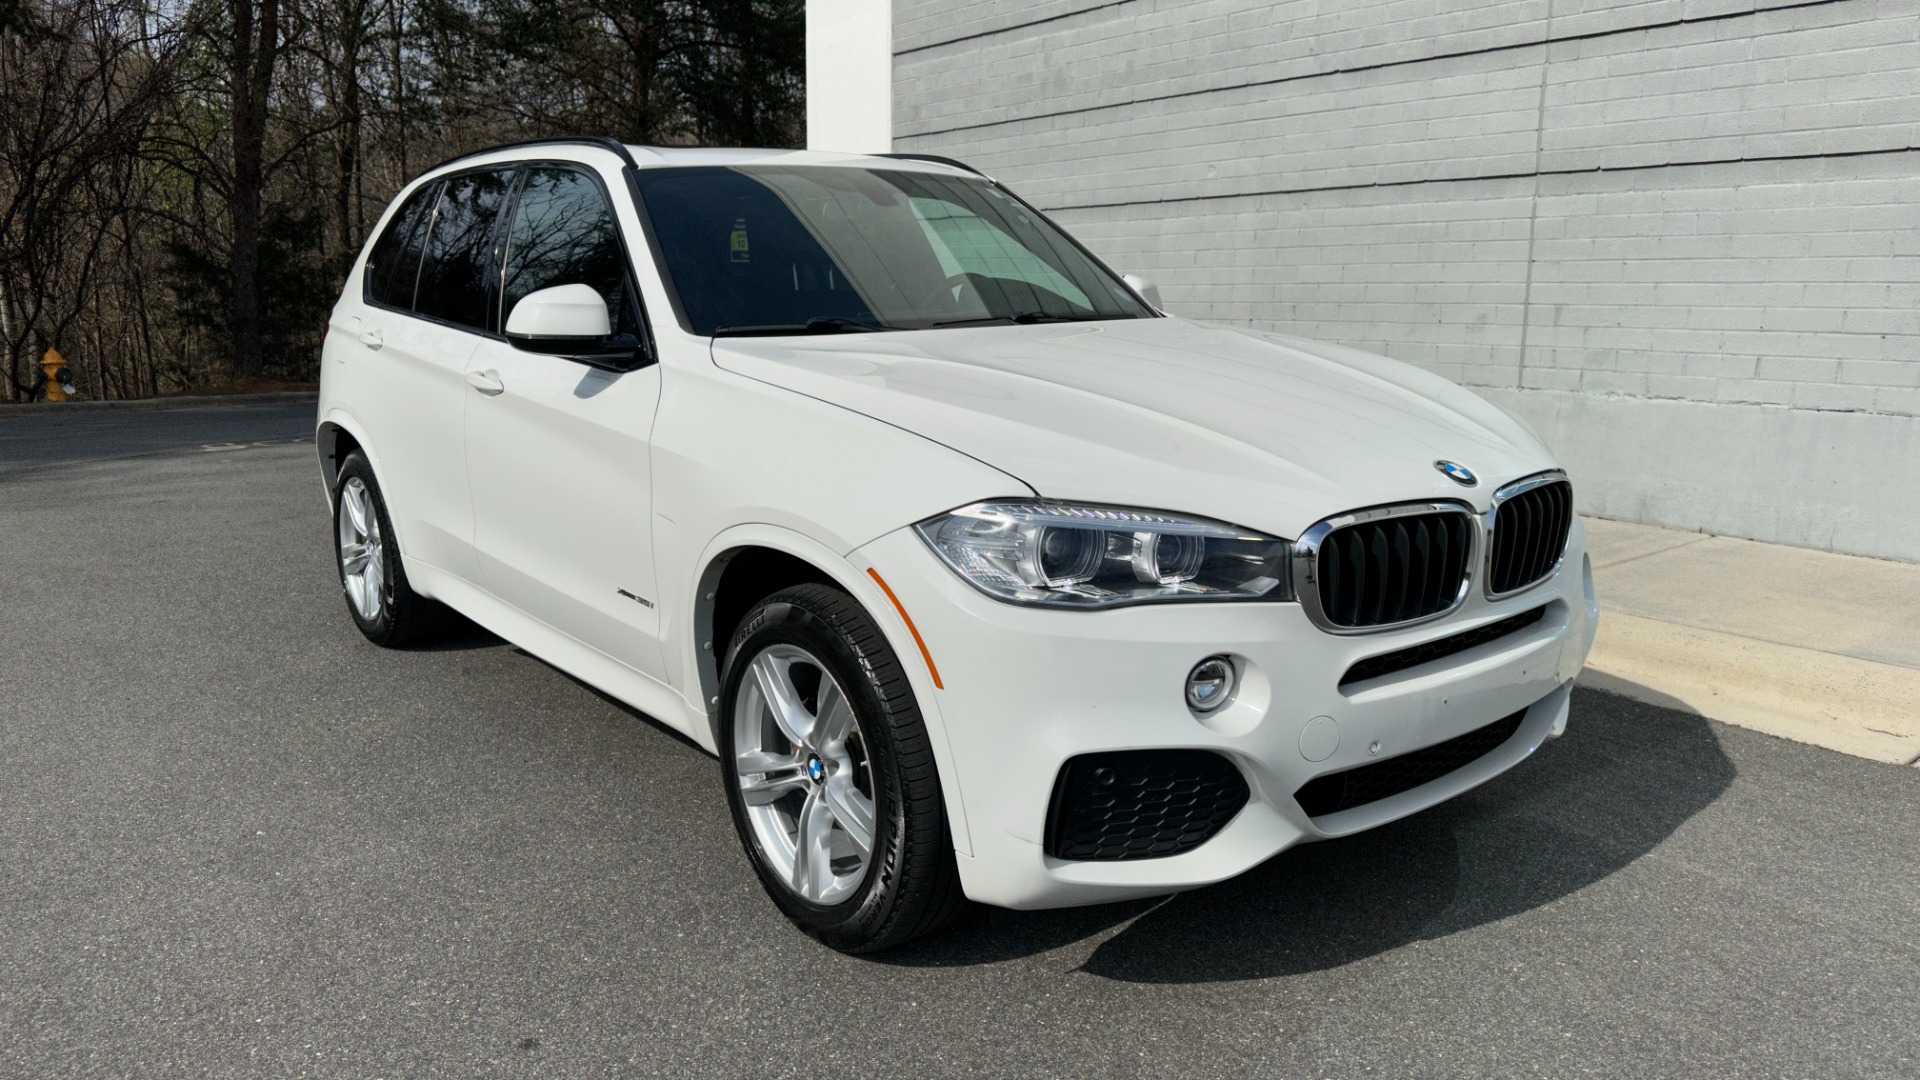 Used 2018 BMW X5 xDrive35i / M SPORT / HARMAN KARDON SOUND / LEATHER for sale Sold at Formula Imports in Charlotte NC 28227 5